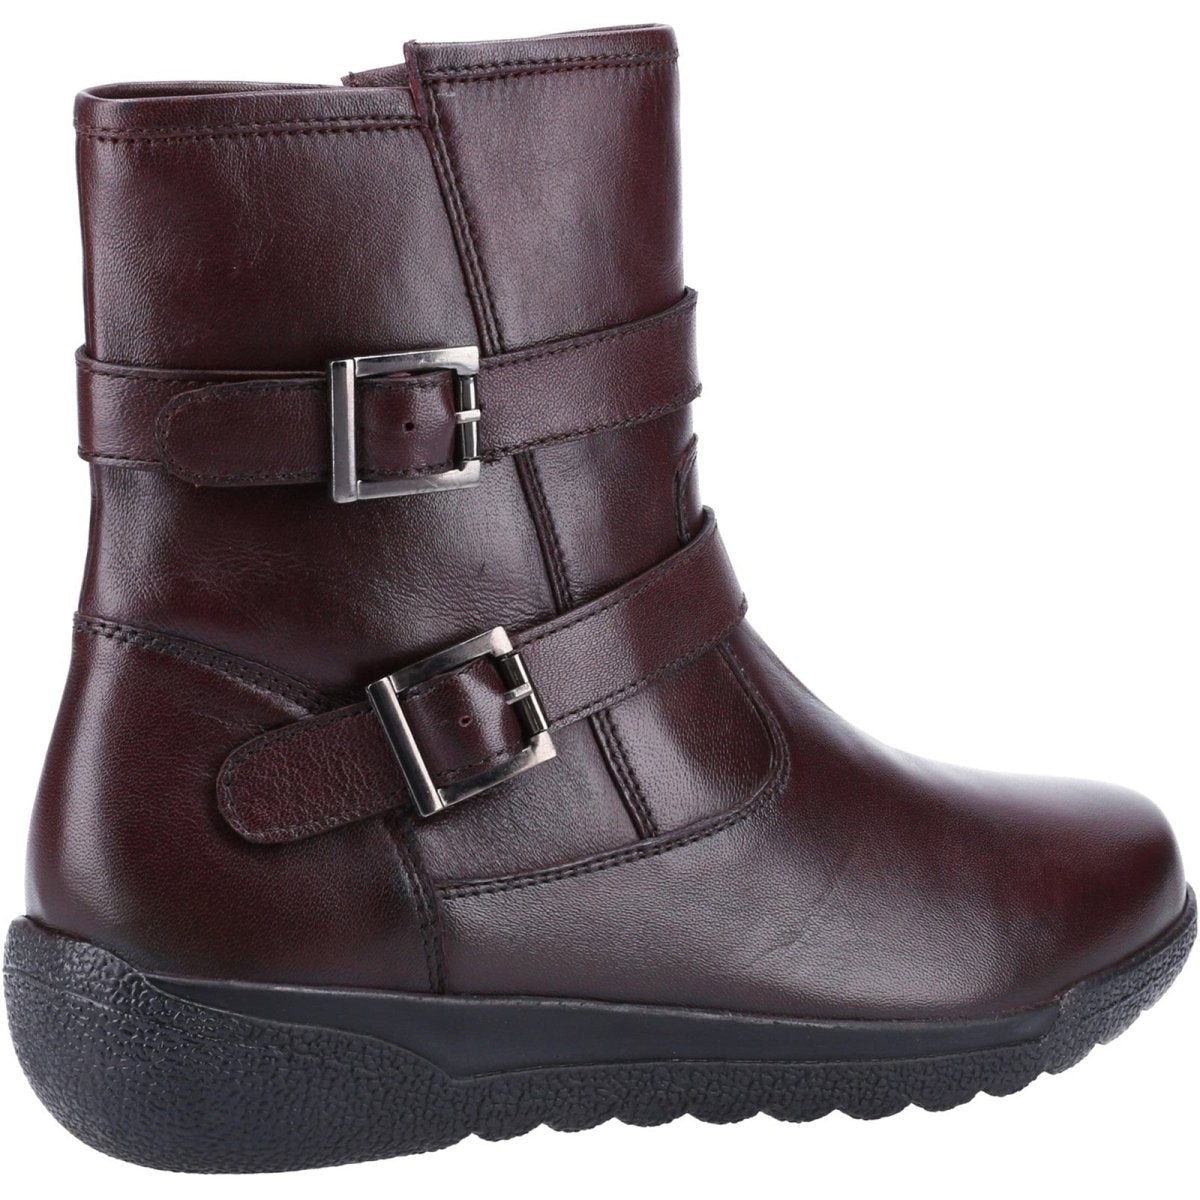 Fleet & Foster Zambia Leather Side-Zip Ladies Ankle Boots - Shoe Store Direct